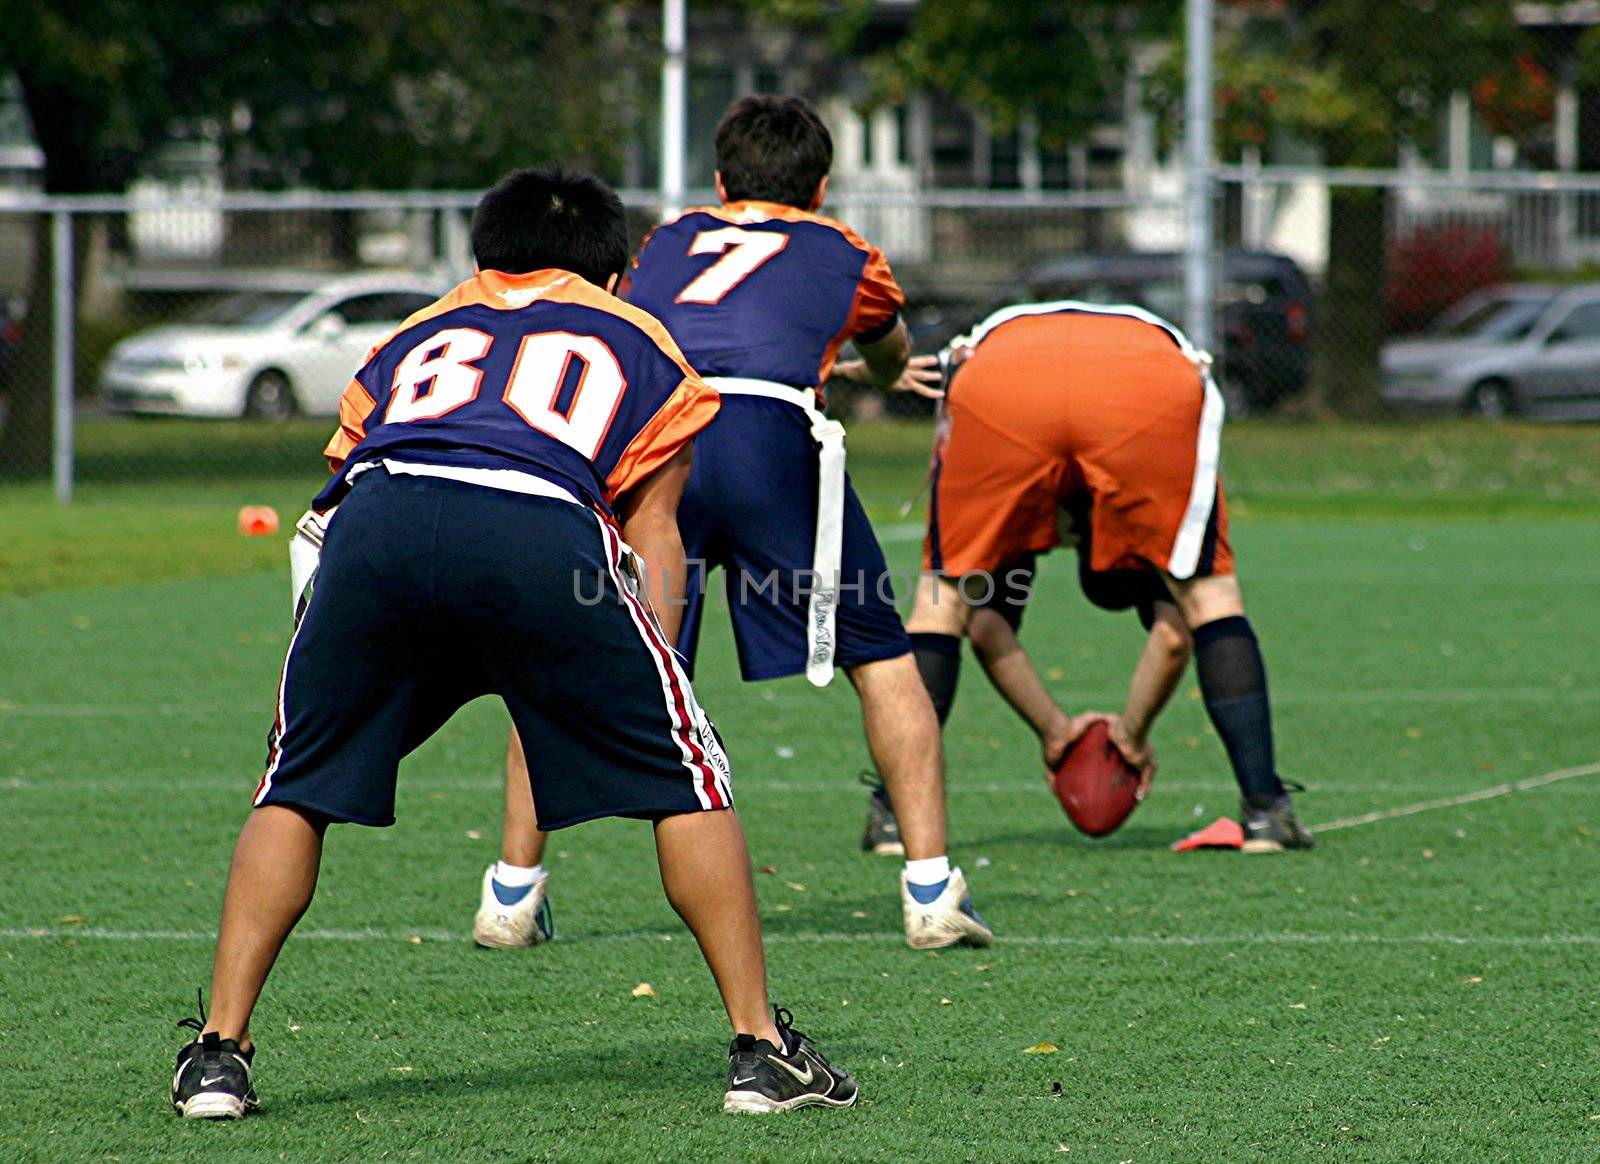 Young men getting ready to run a play in football